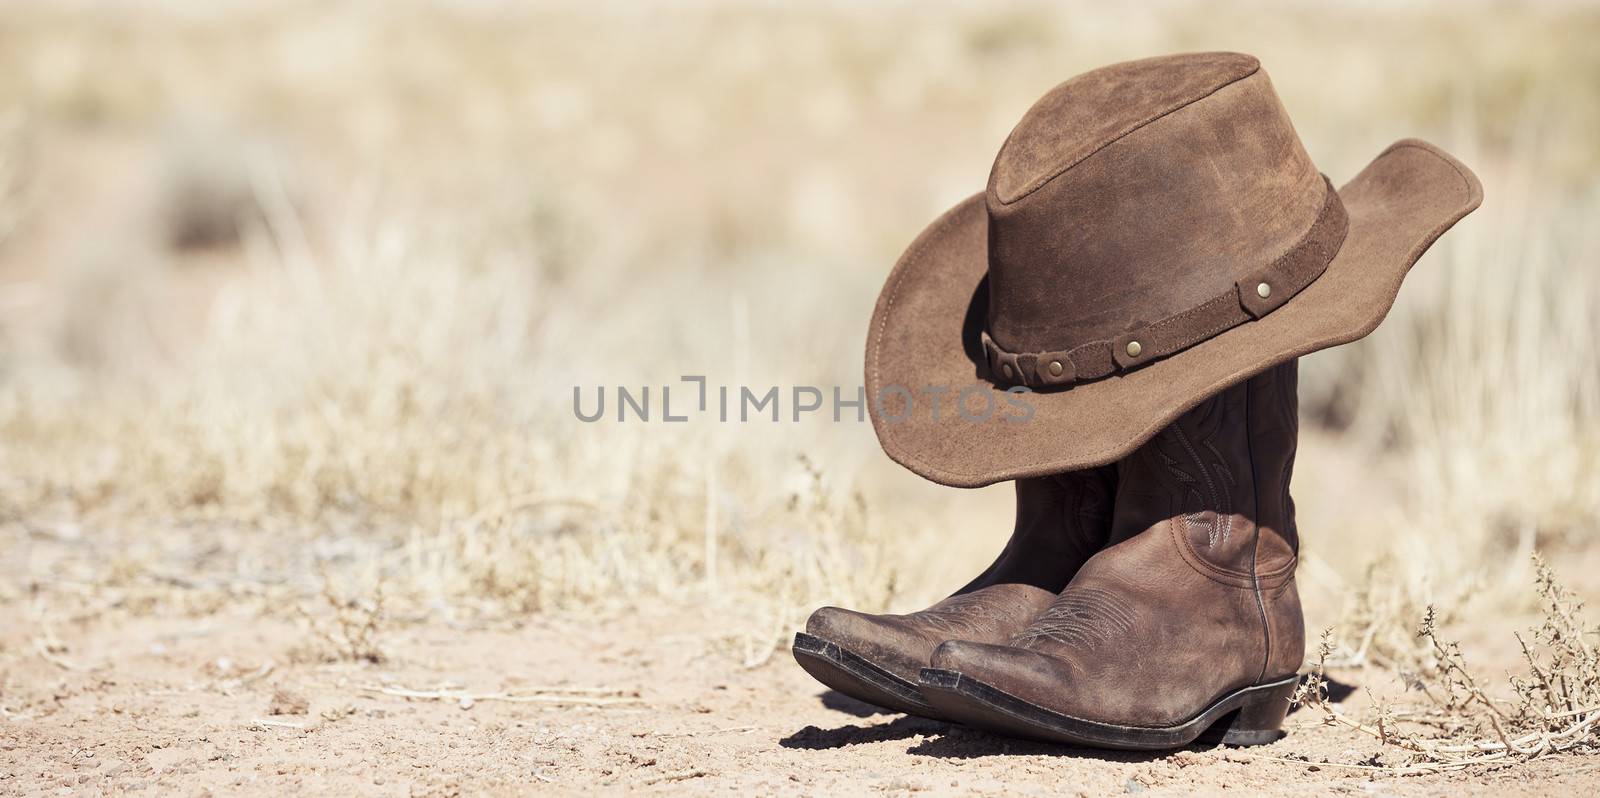 brown cowboy hat and boots outdoor by vwalakte